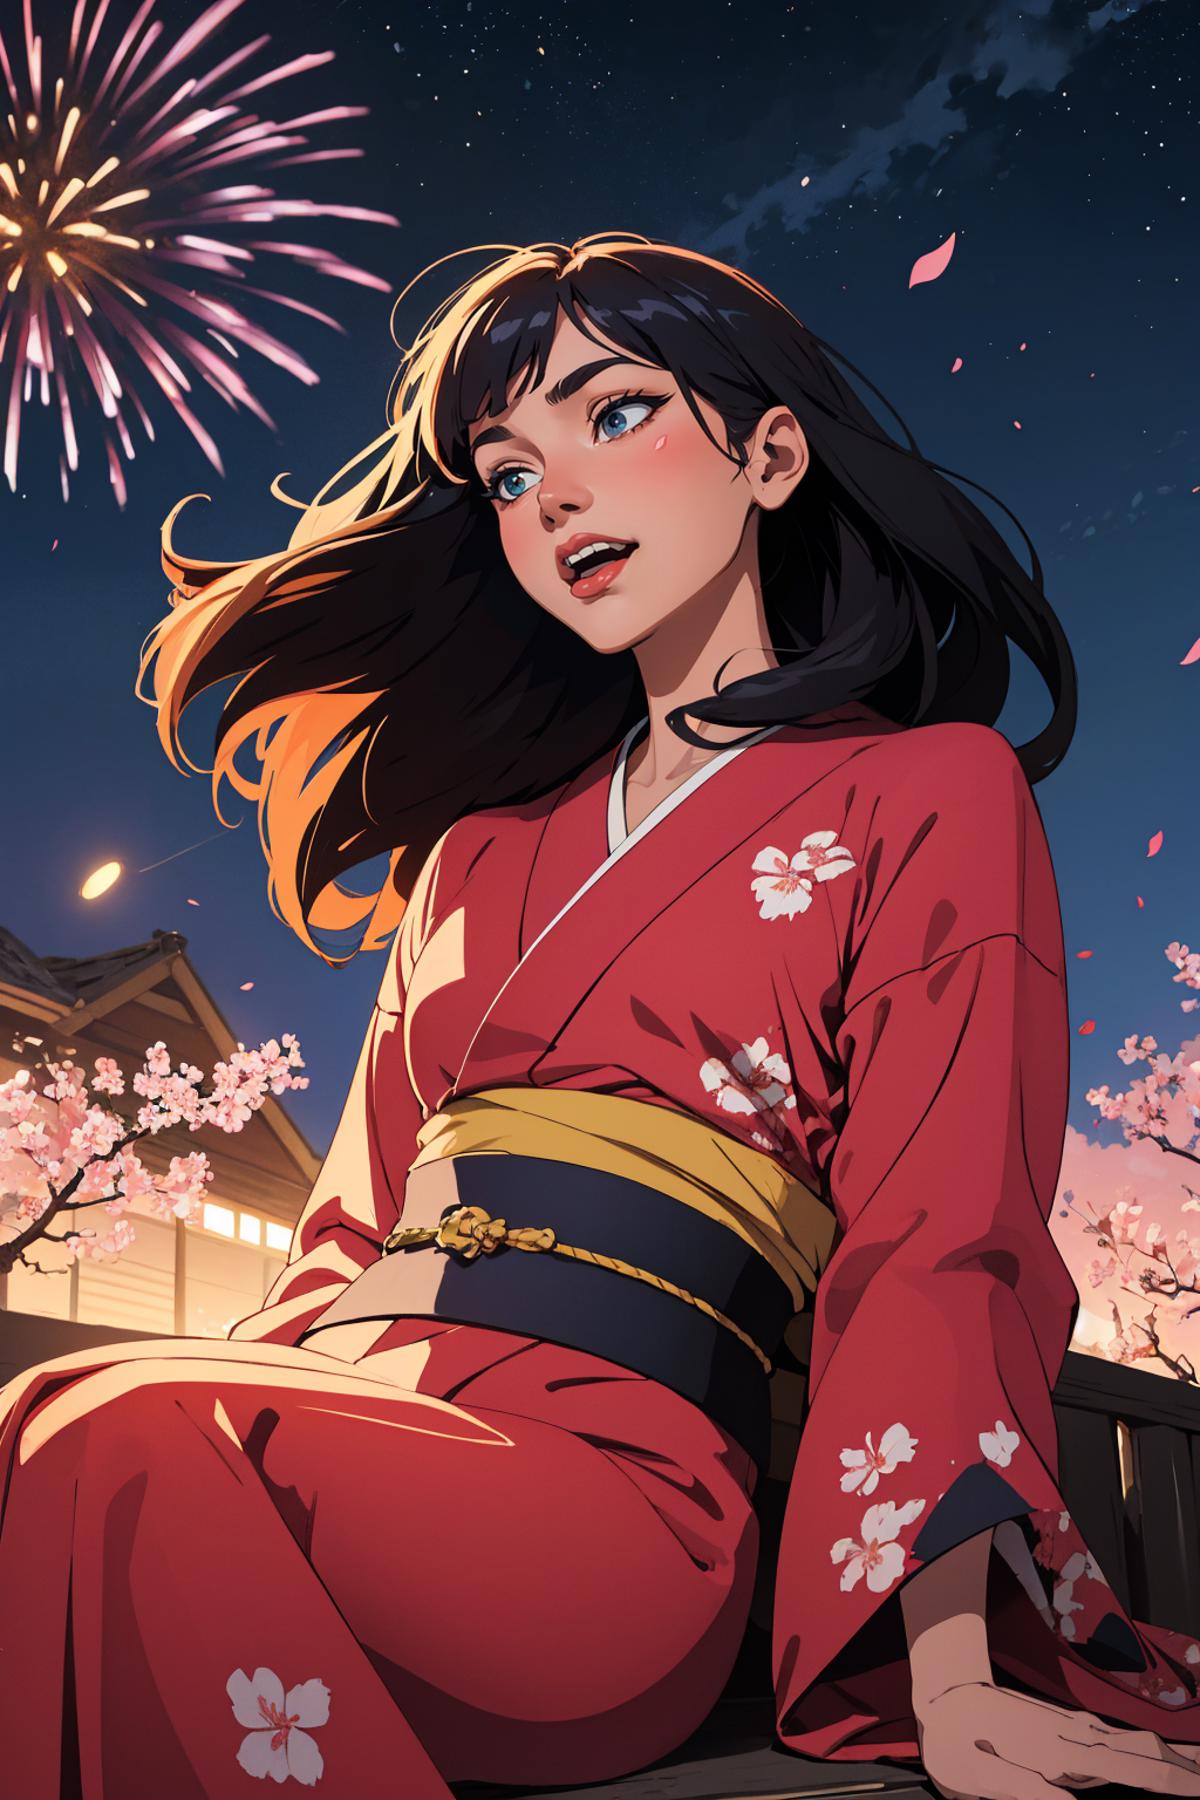 Anime-style image of a woman with long black hair wearing a red kimono.